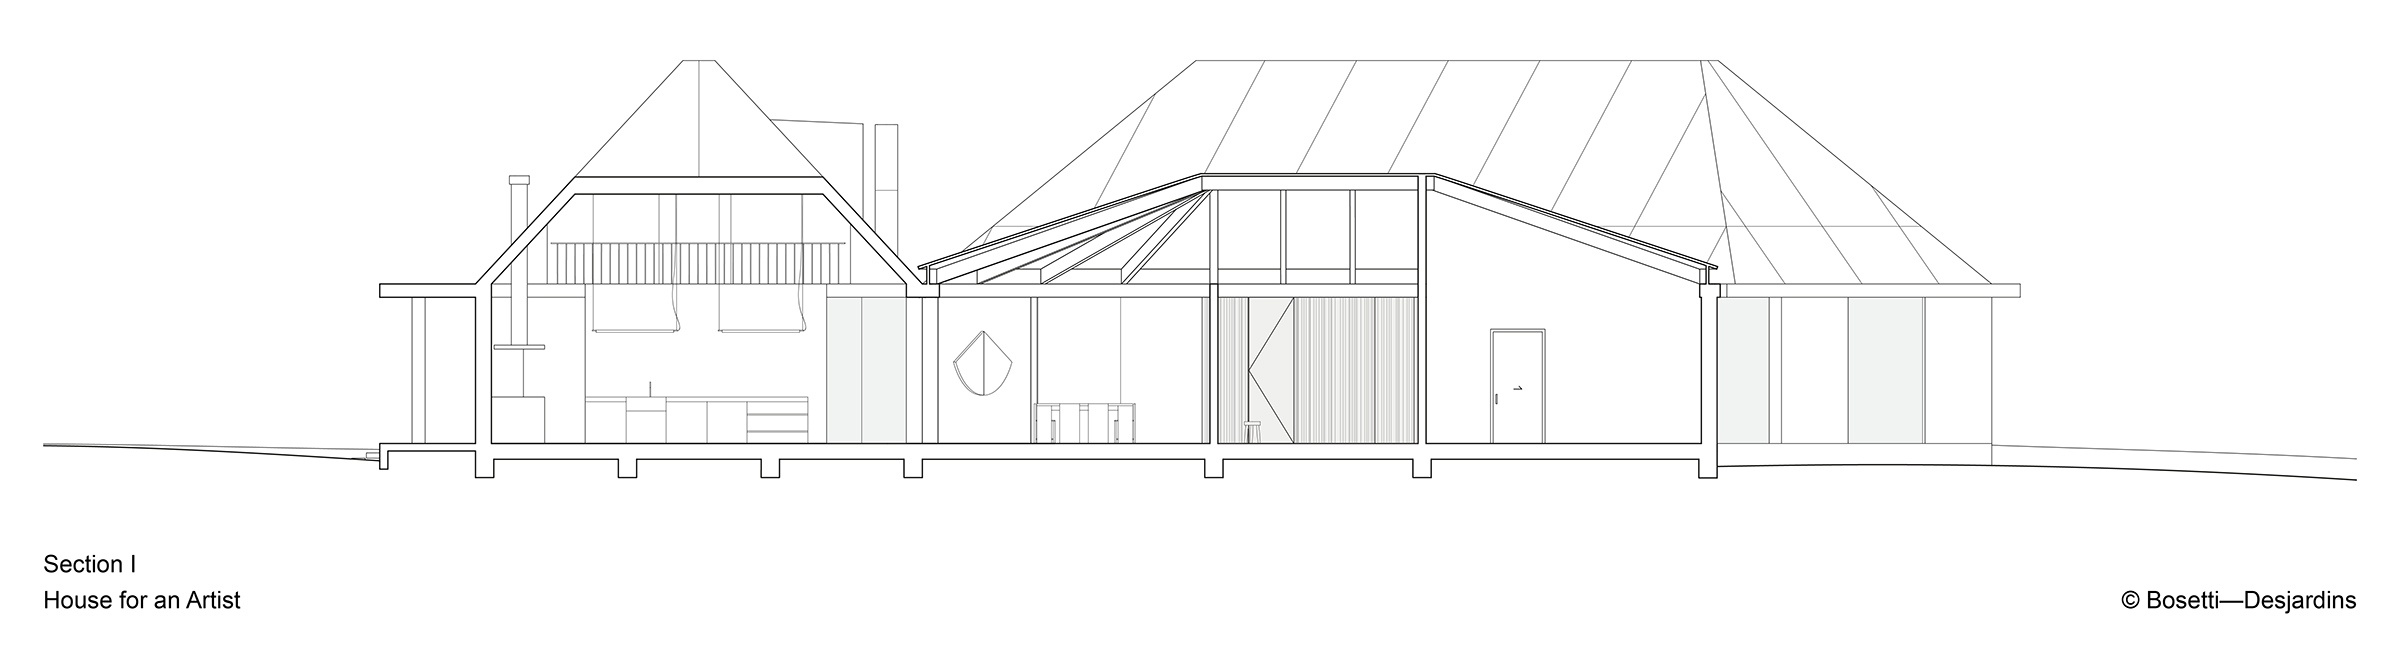 House_Drawing_Section-I